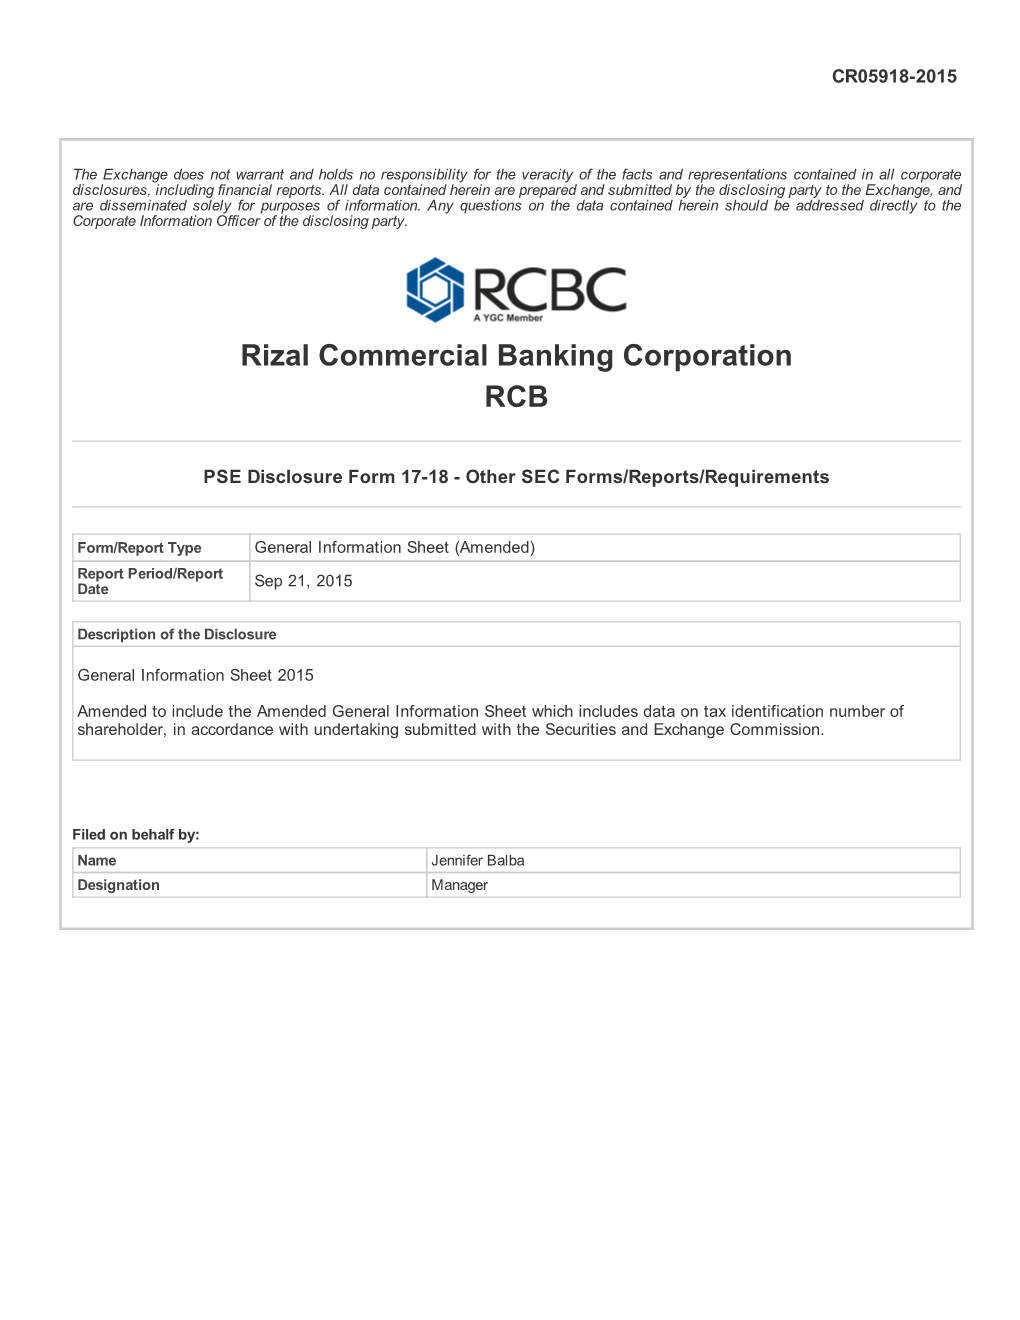 Rizal Commercial Banking Corporation RCB